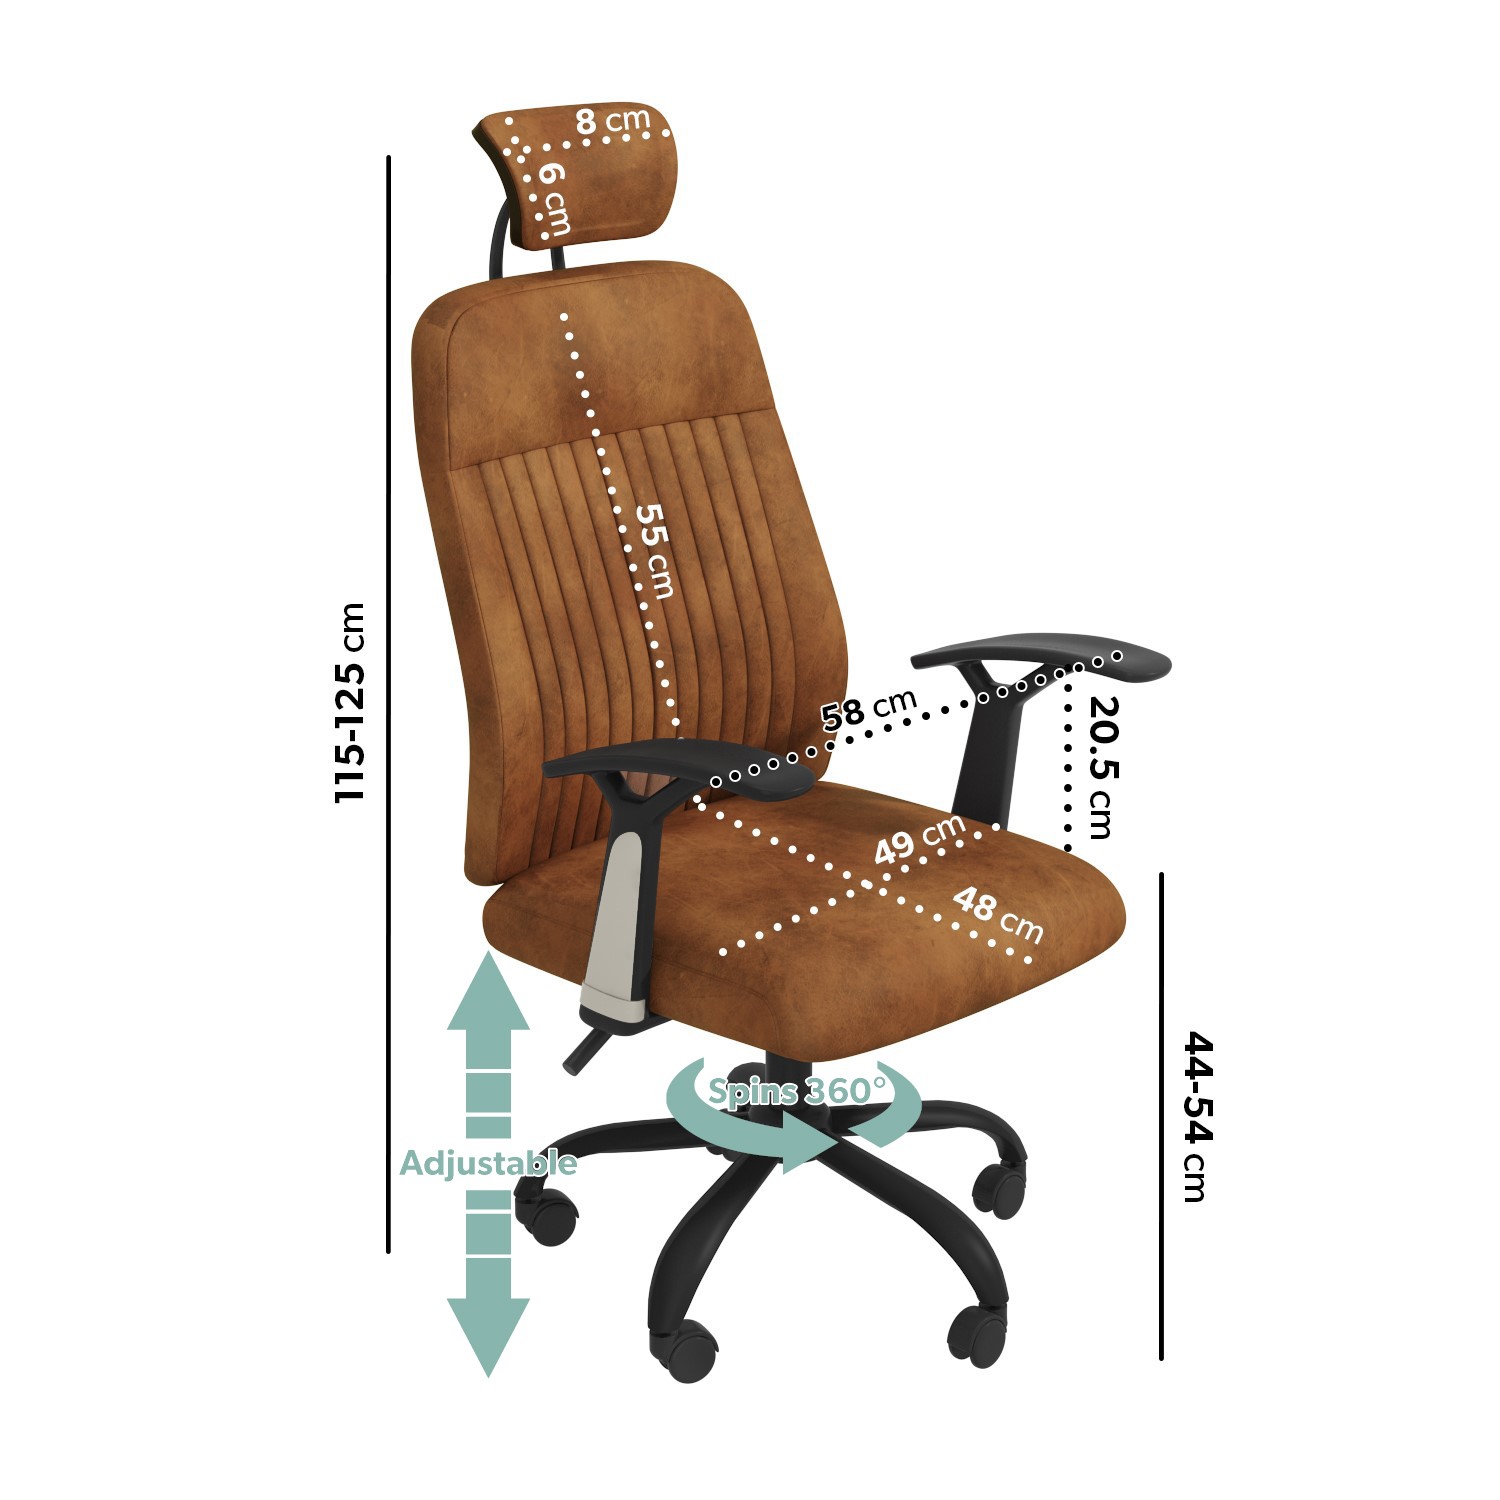 Read more about Tan faux leather executive high back office chair harlan